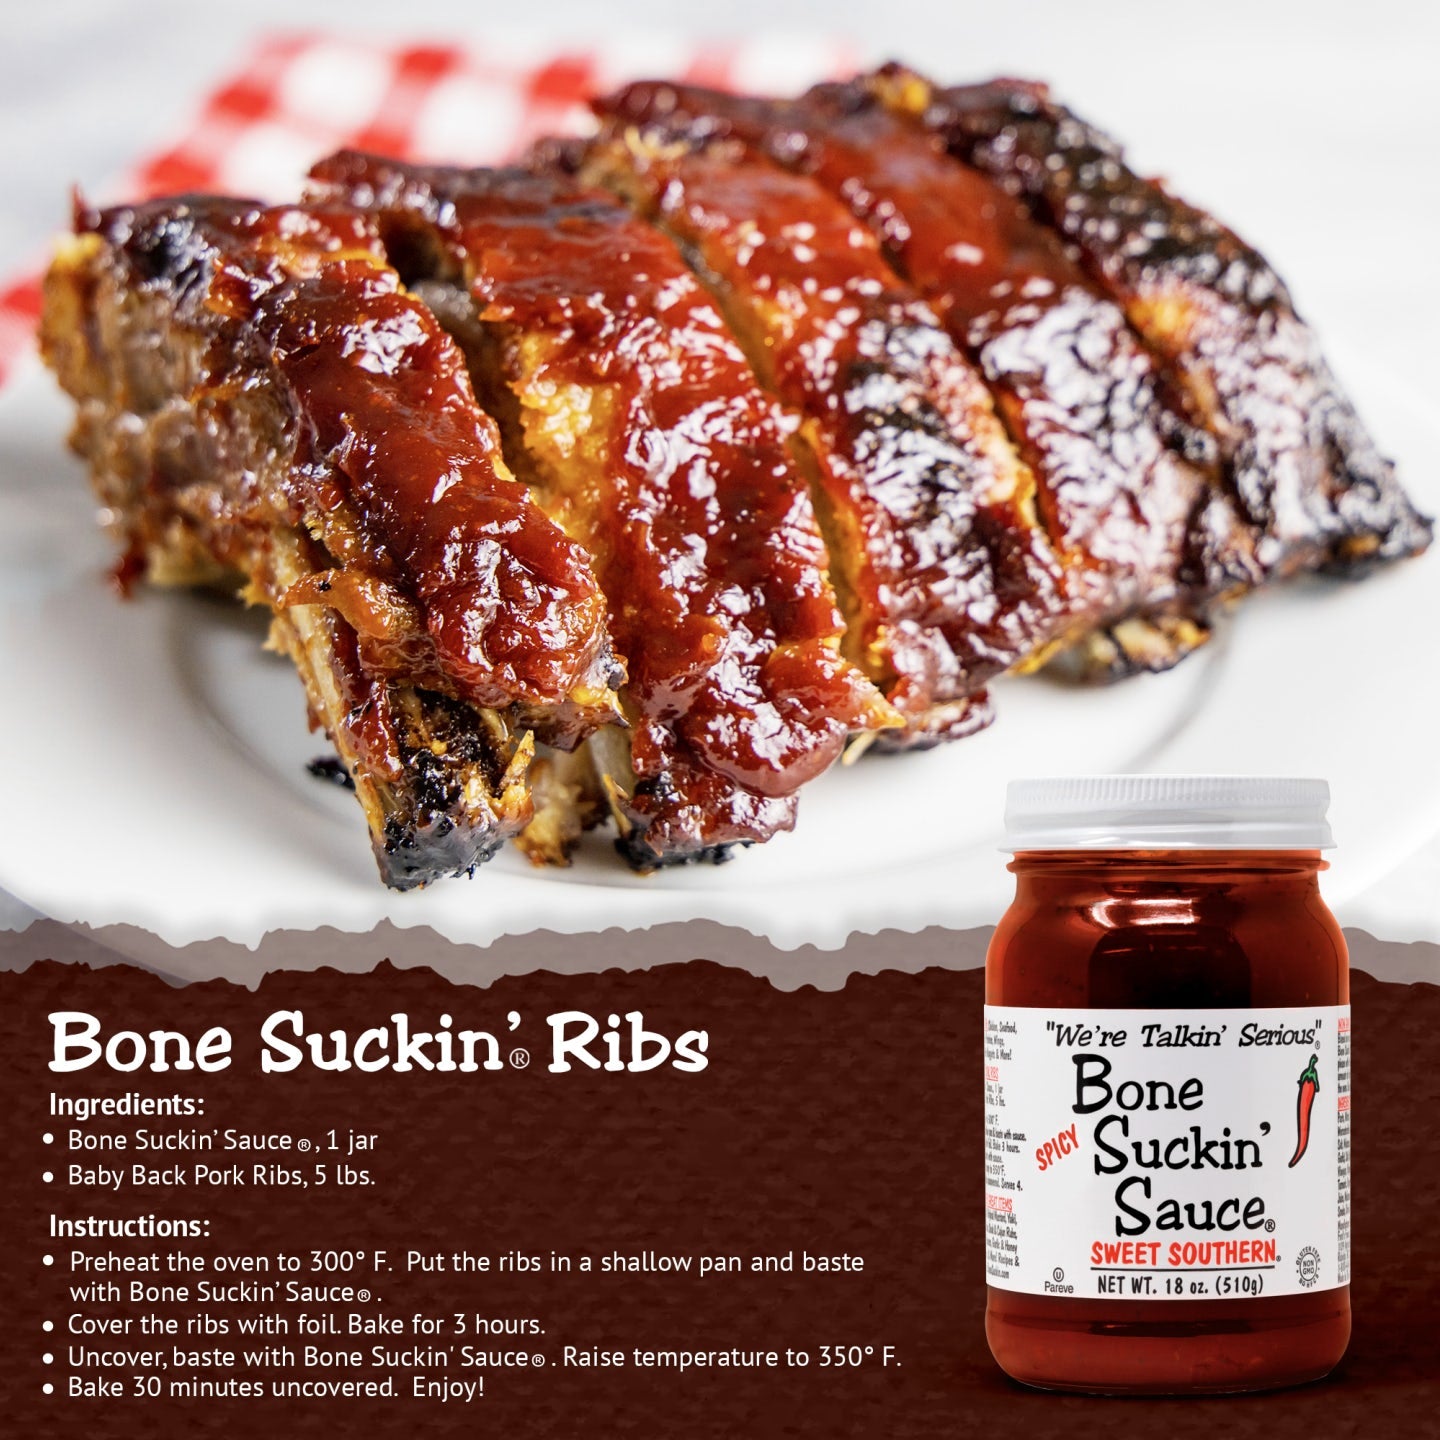 Bone Suckin’® Ribs Recipe Bone Suckin Sauce®, 1 jar Baby Back Pork Ribs, 5 lbs. Preheat oven to 300 degrees. Put ribs in shallow pan and baste with sauce. Cover ribs with foil. Bake 3 hours. Uncover, baste with Sauce. Raise temperature to 350 degrees and bake 30 minutes uncovered.